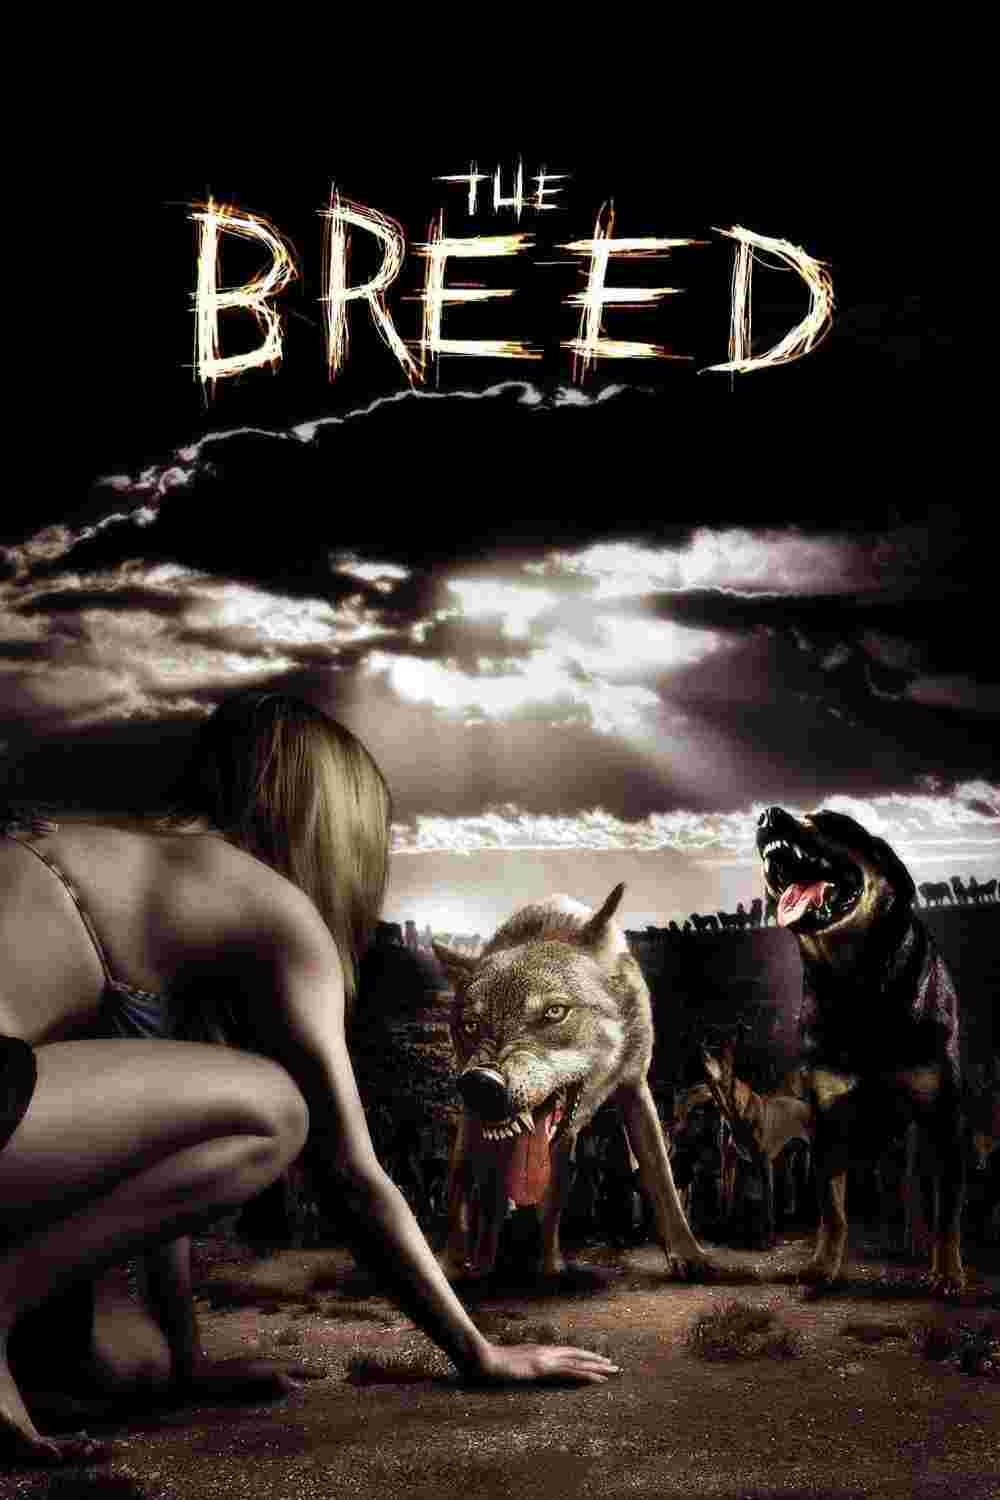 The Breed (2006) Michelle Rodriguez